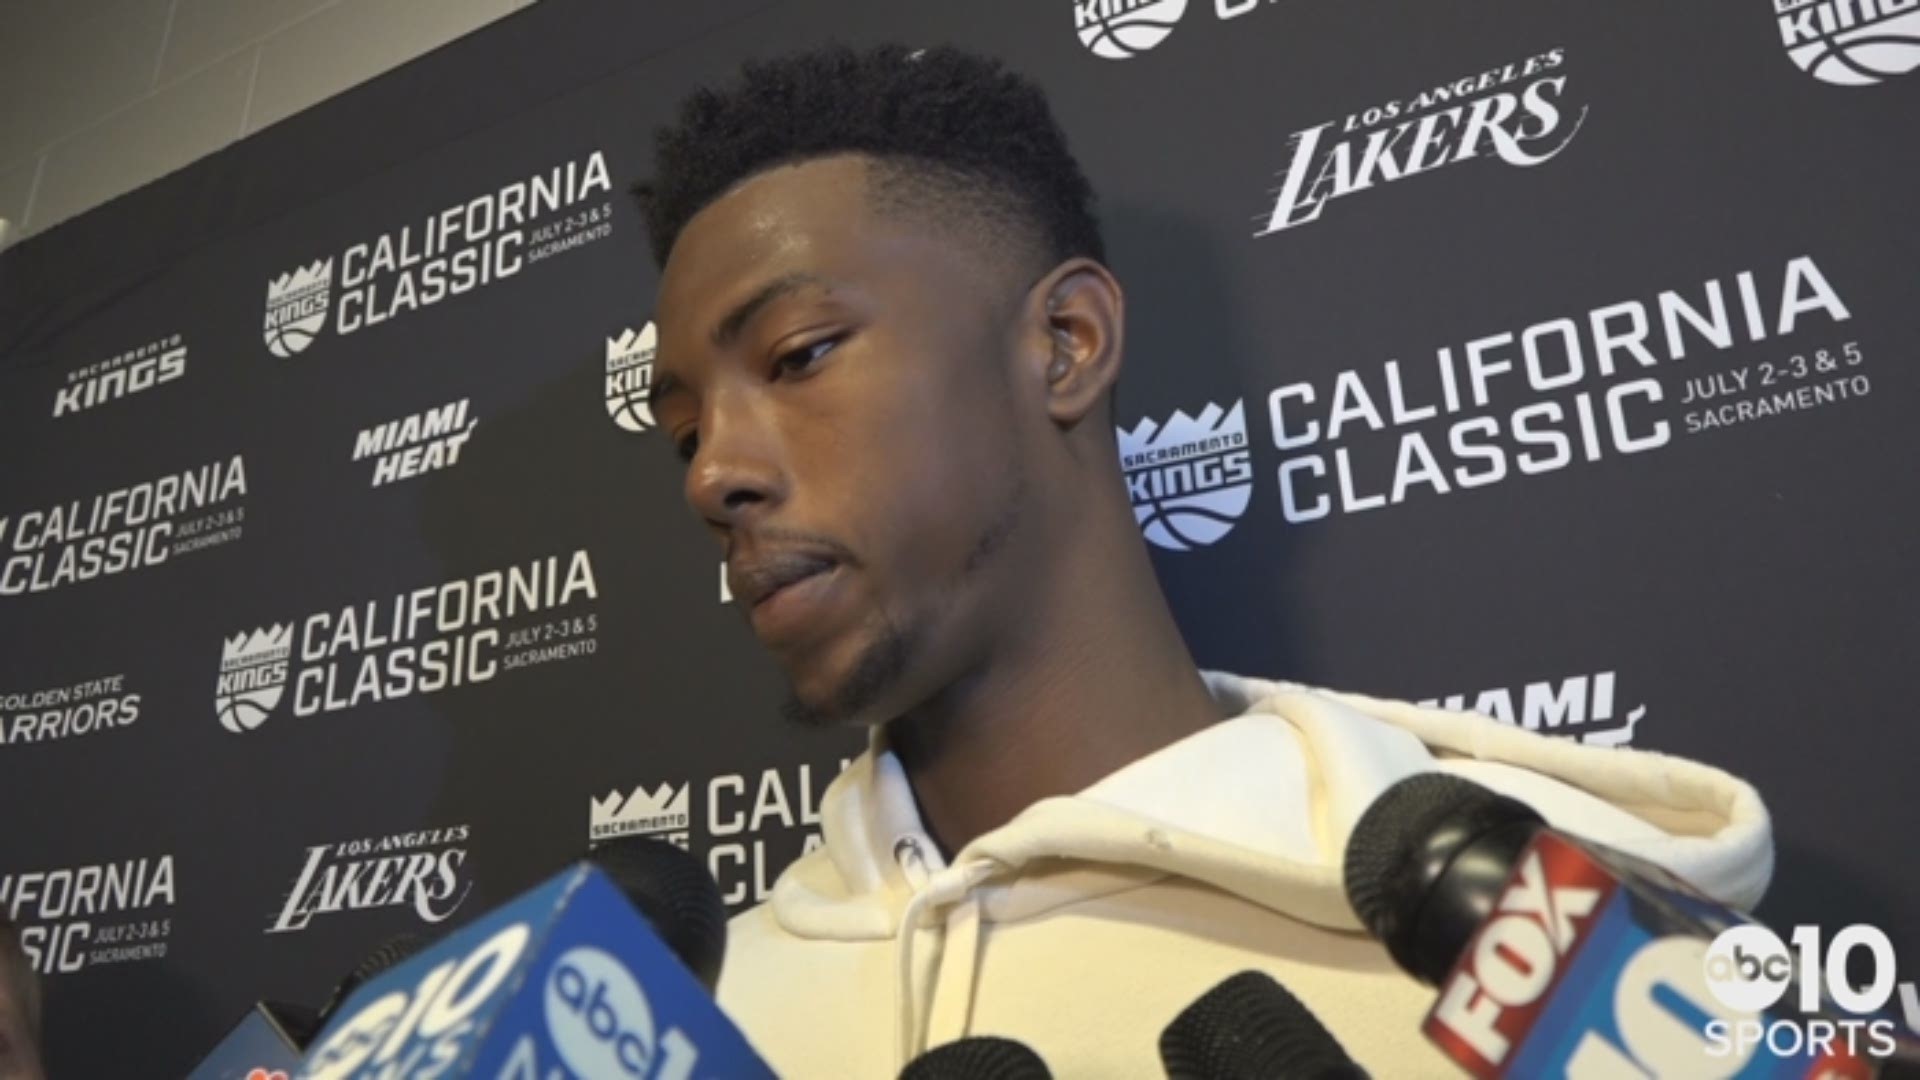 Kings rookie center Harry Giles discusses Thursday's loss to the Miami Heat to conclude the California Classic, the struggles from his teammate Marvin Bagley III and still finding himself after three summer league games.